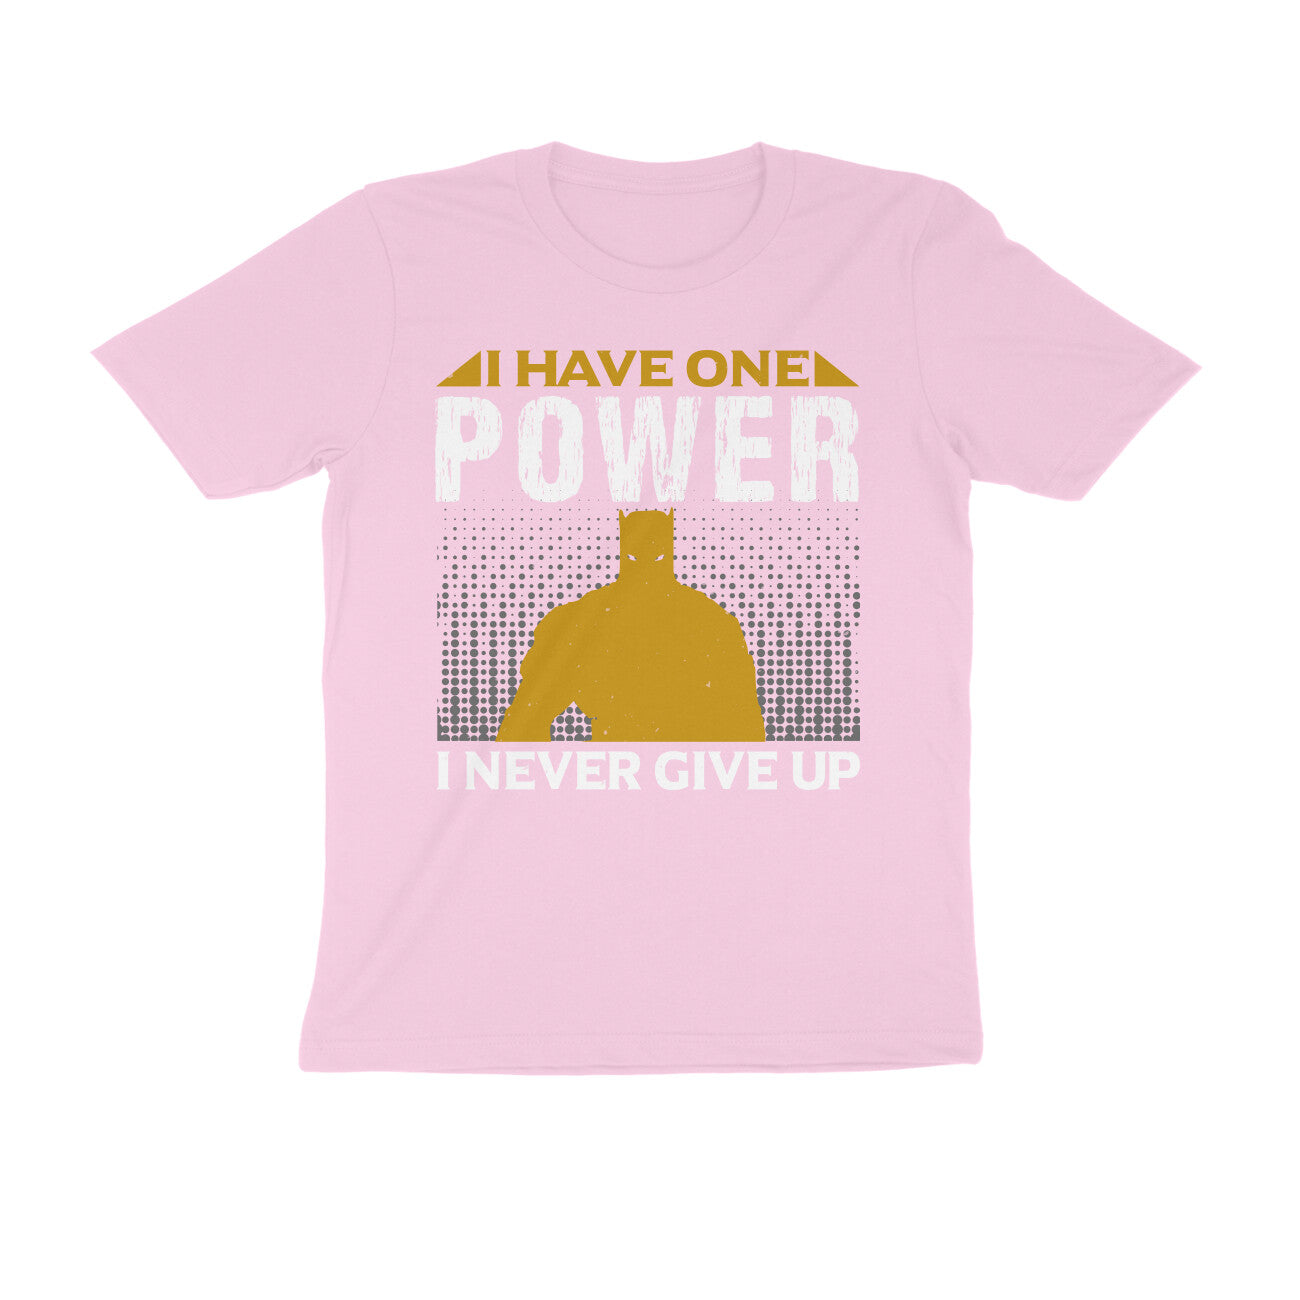 TNH - Men's Round Neck Tshirt - Never Give Up